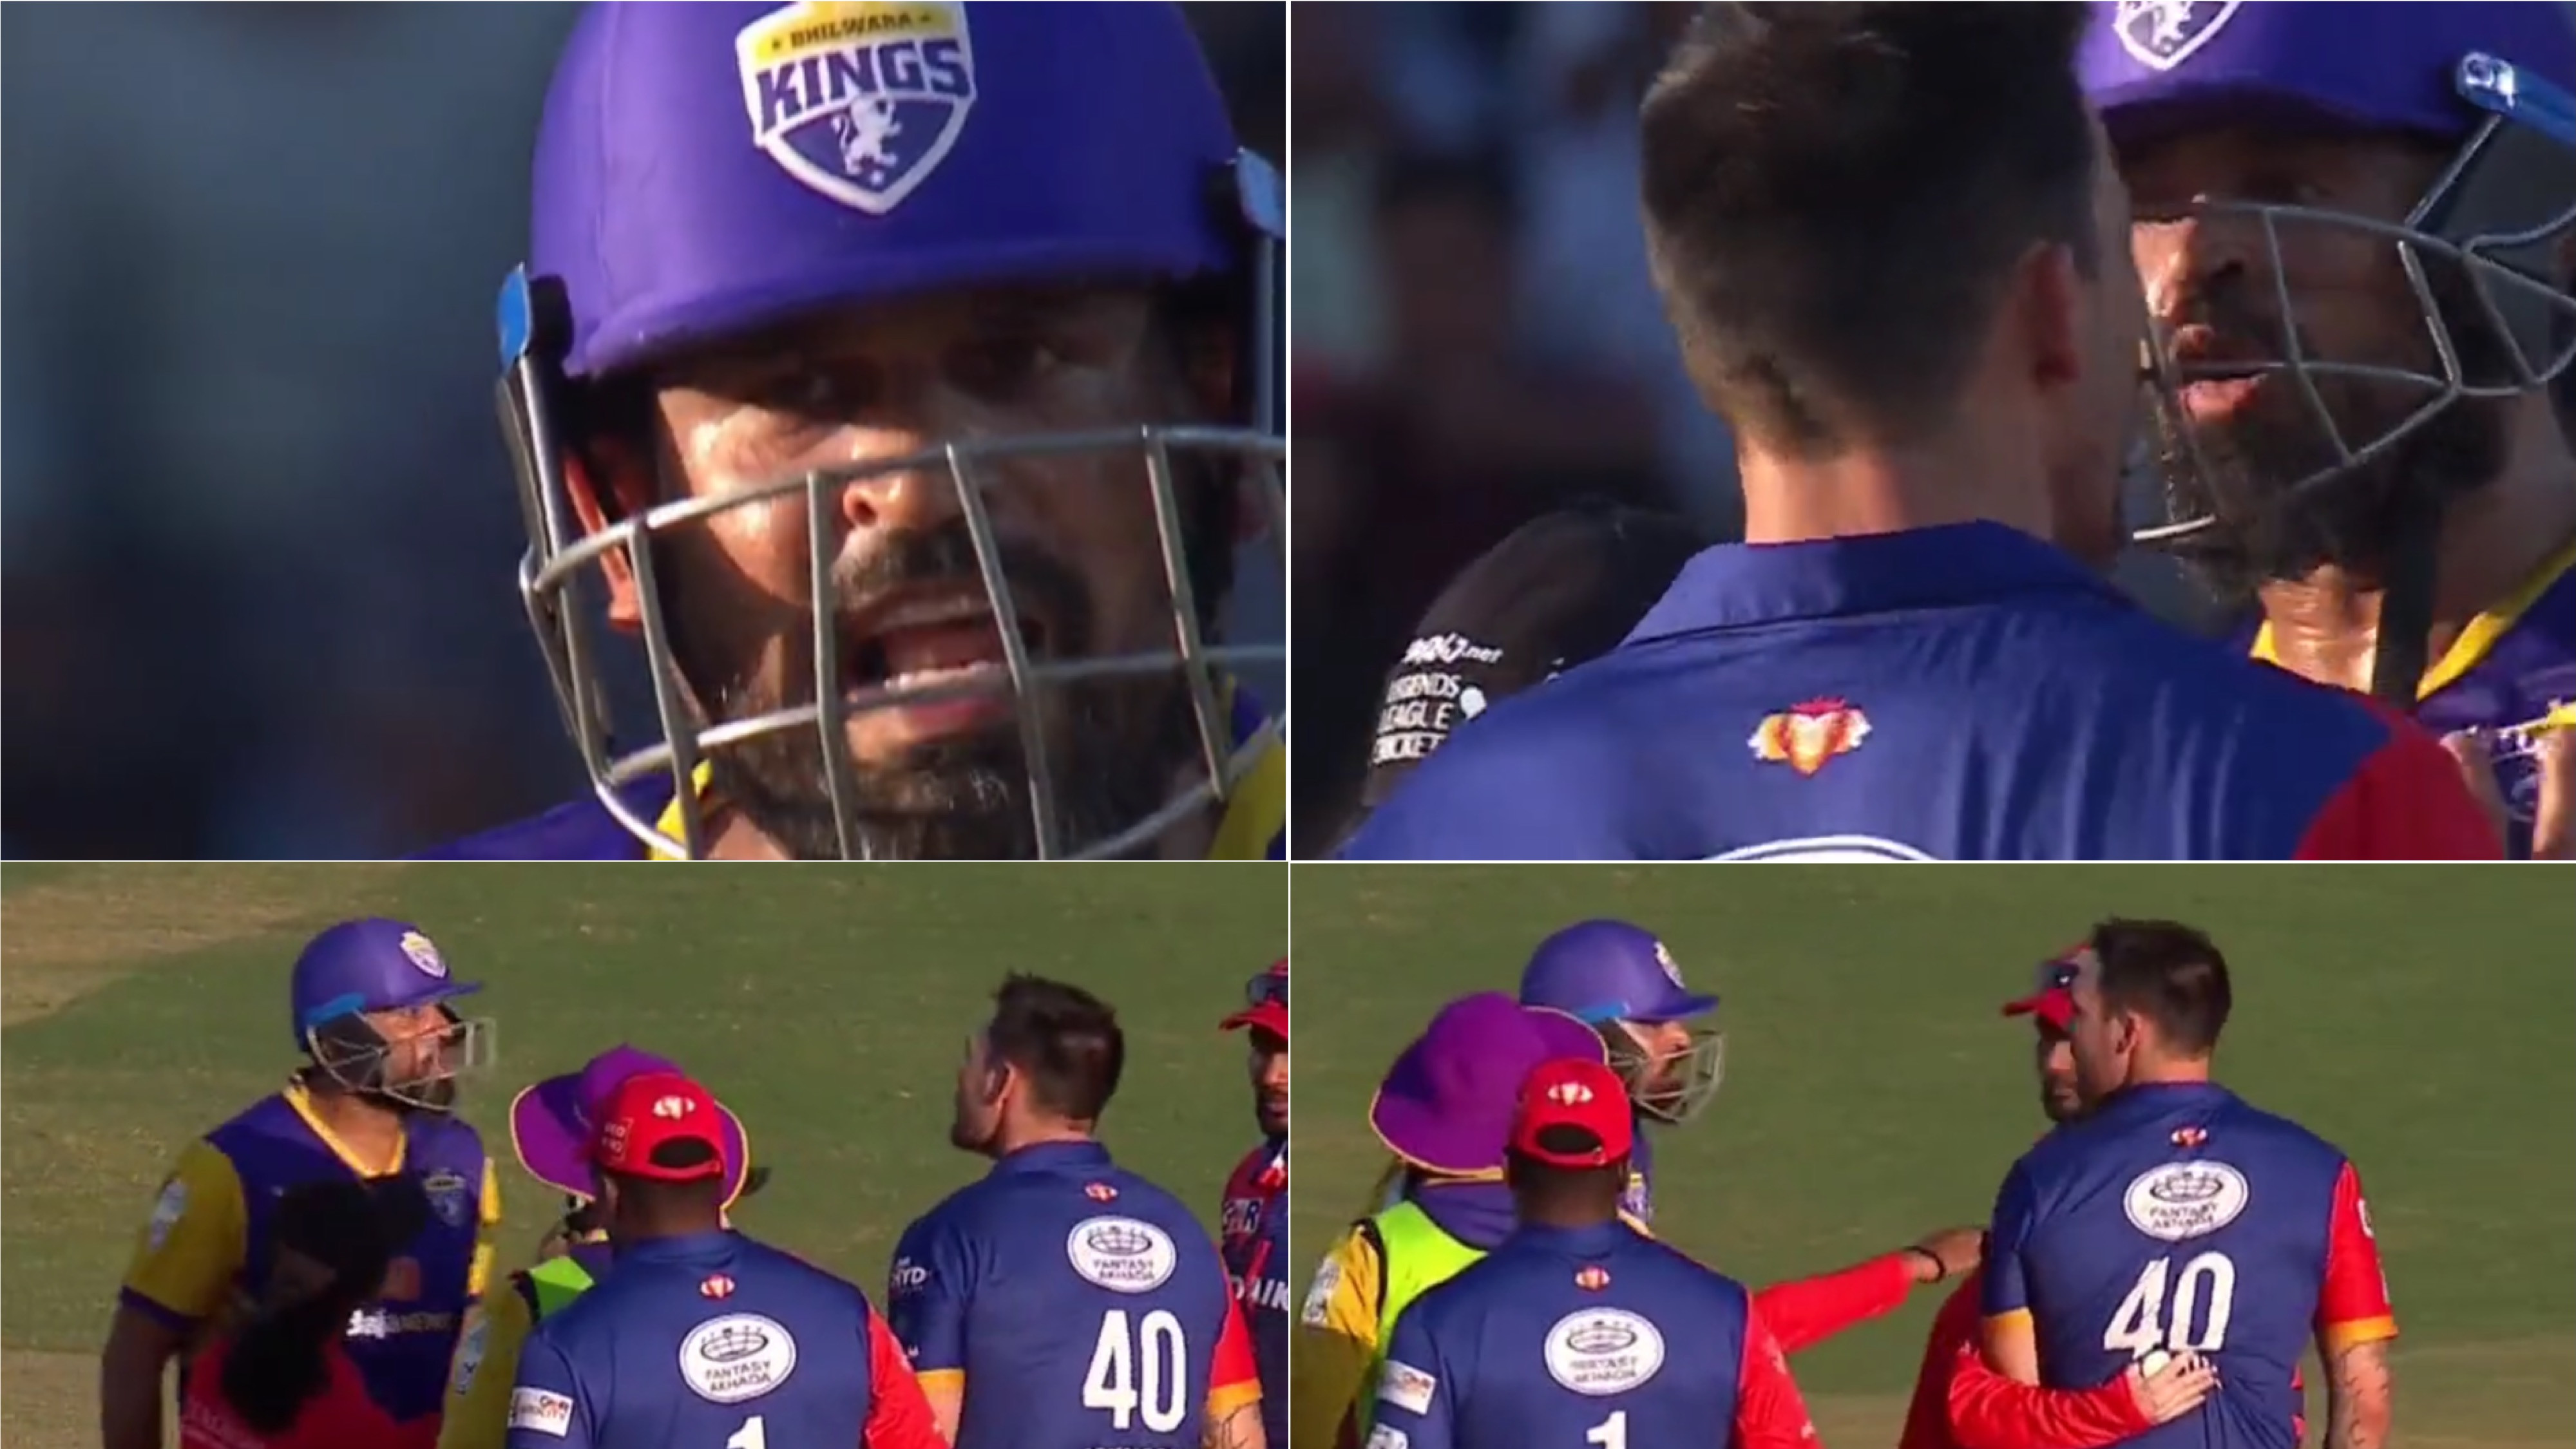 LLC T20 2022: WATCH - Mitchell Johnson pushes Yusuf Pathan away amidst heated exchange